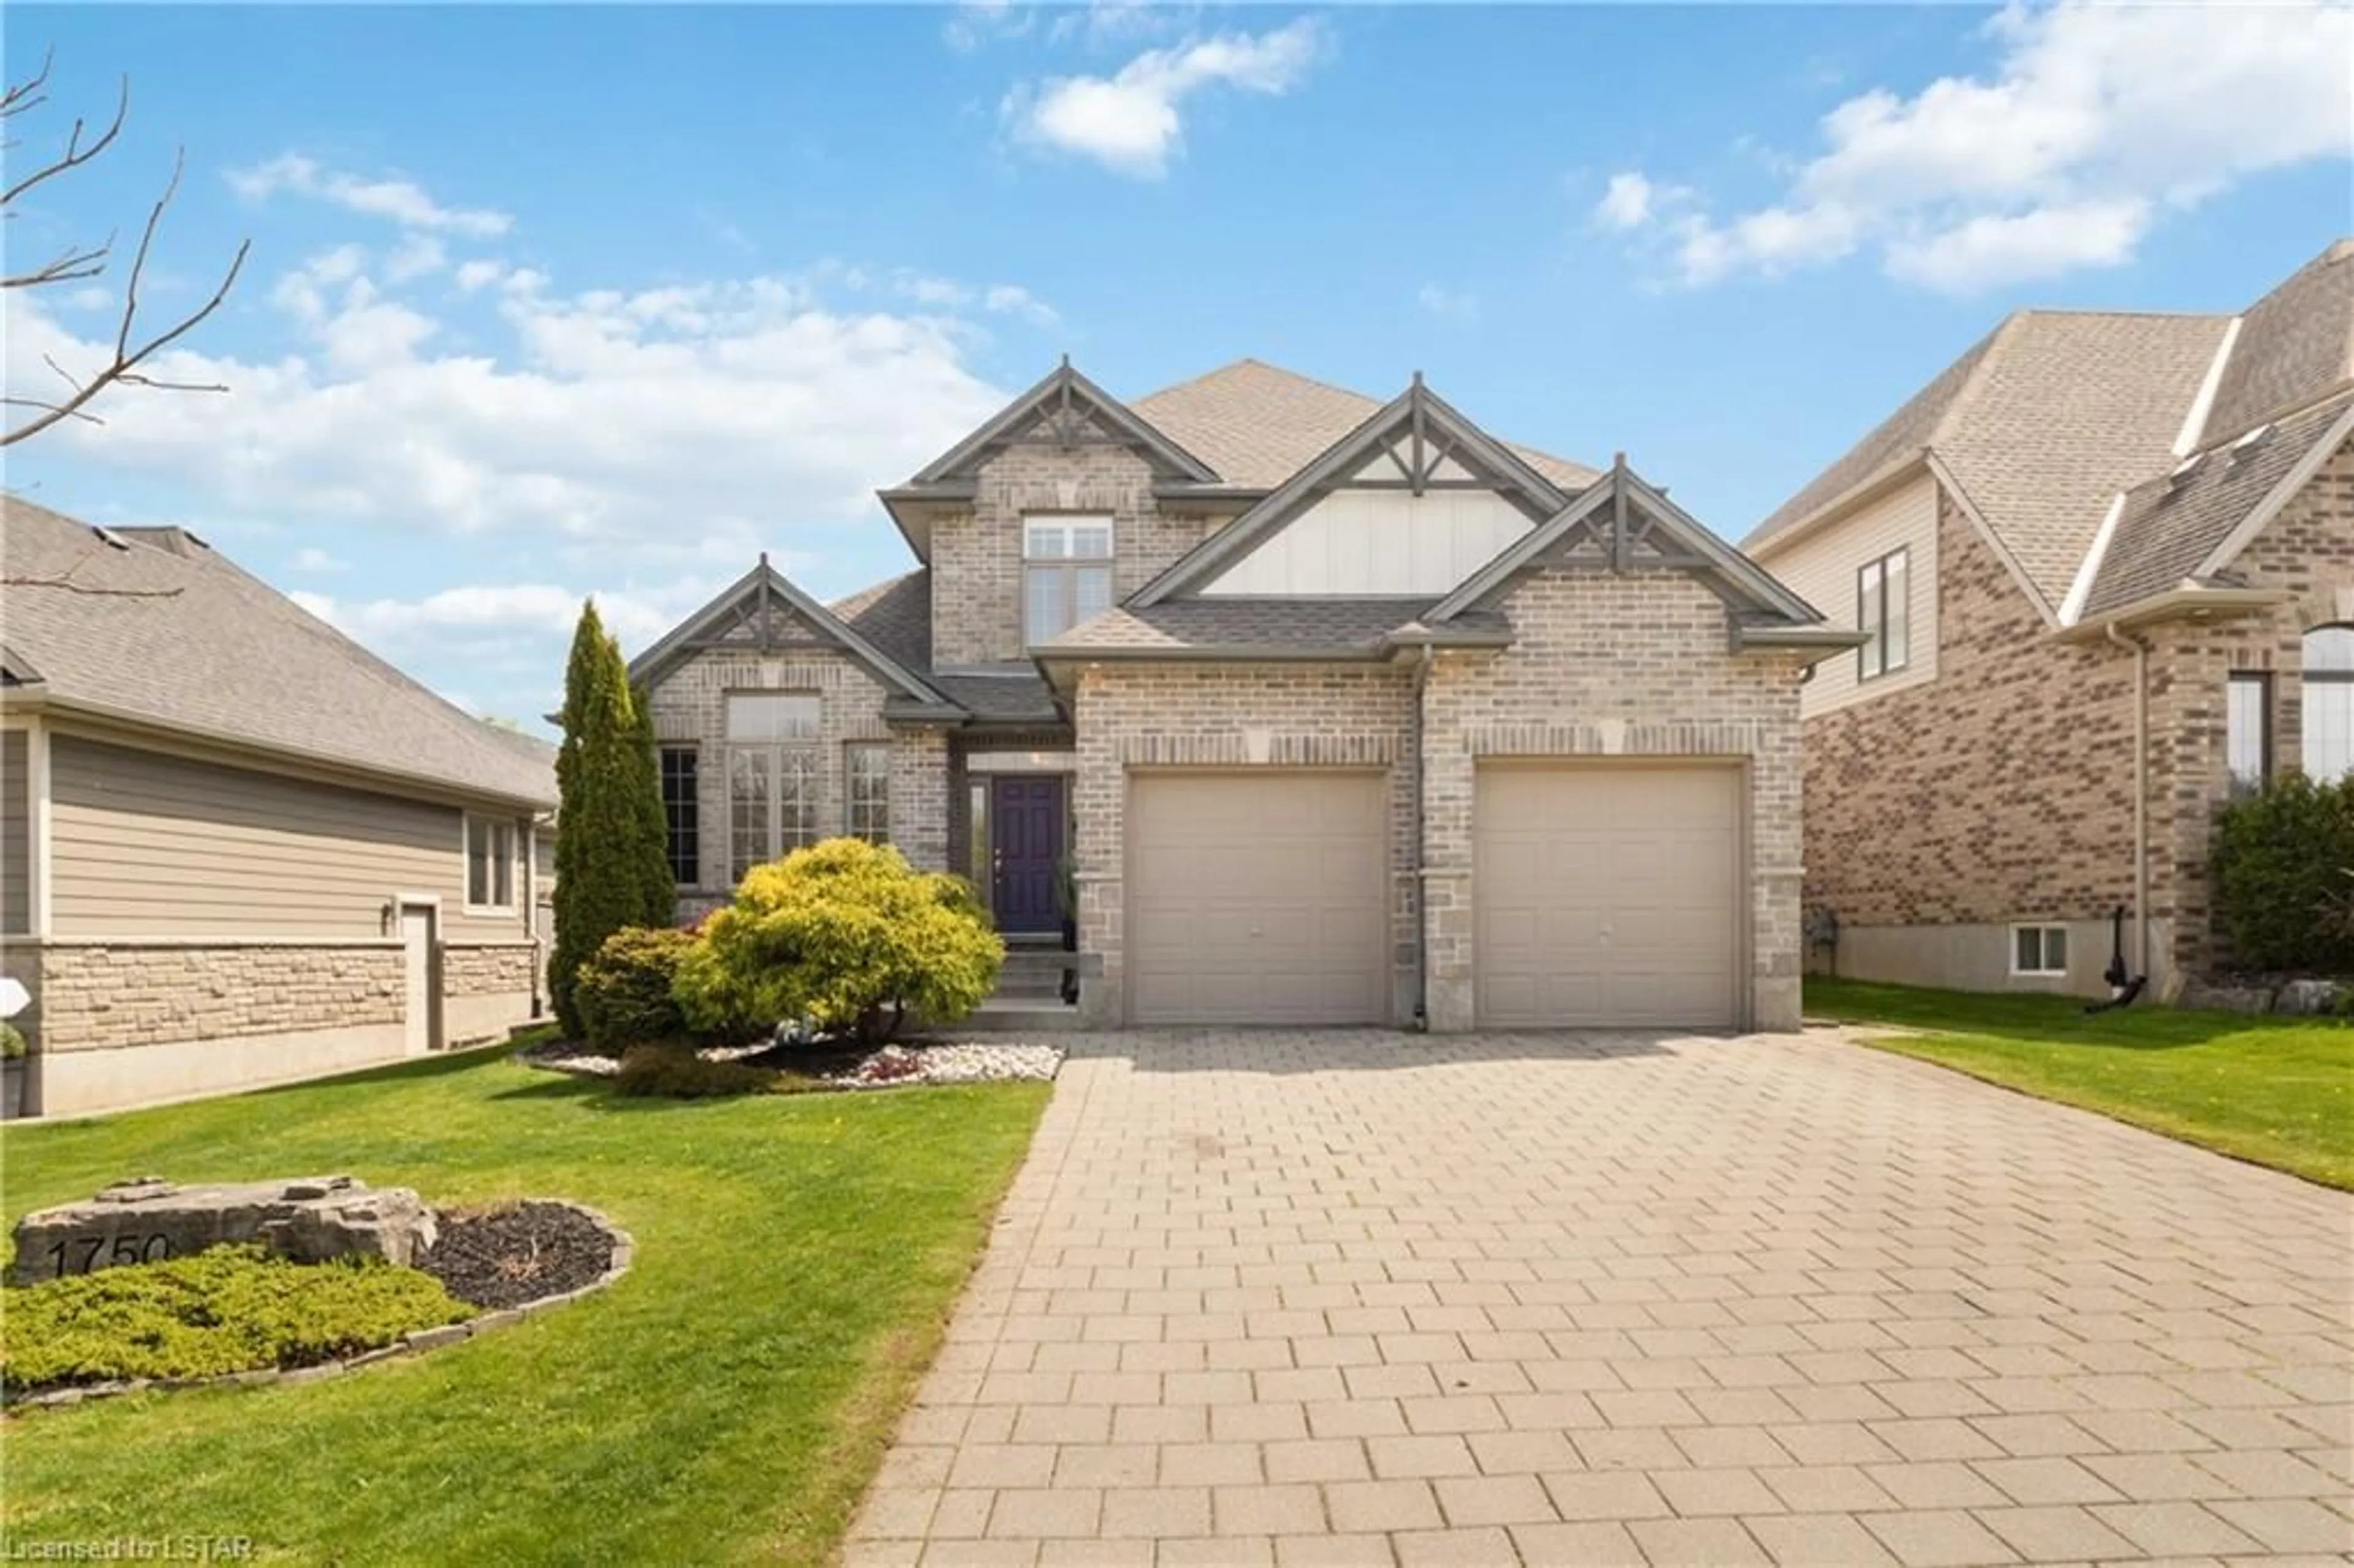 Frontside or backside of a home for 1750 Tigerlily Rd, London Ontario N6K 0A3